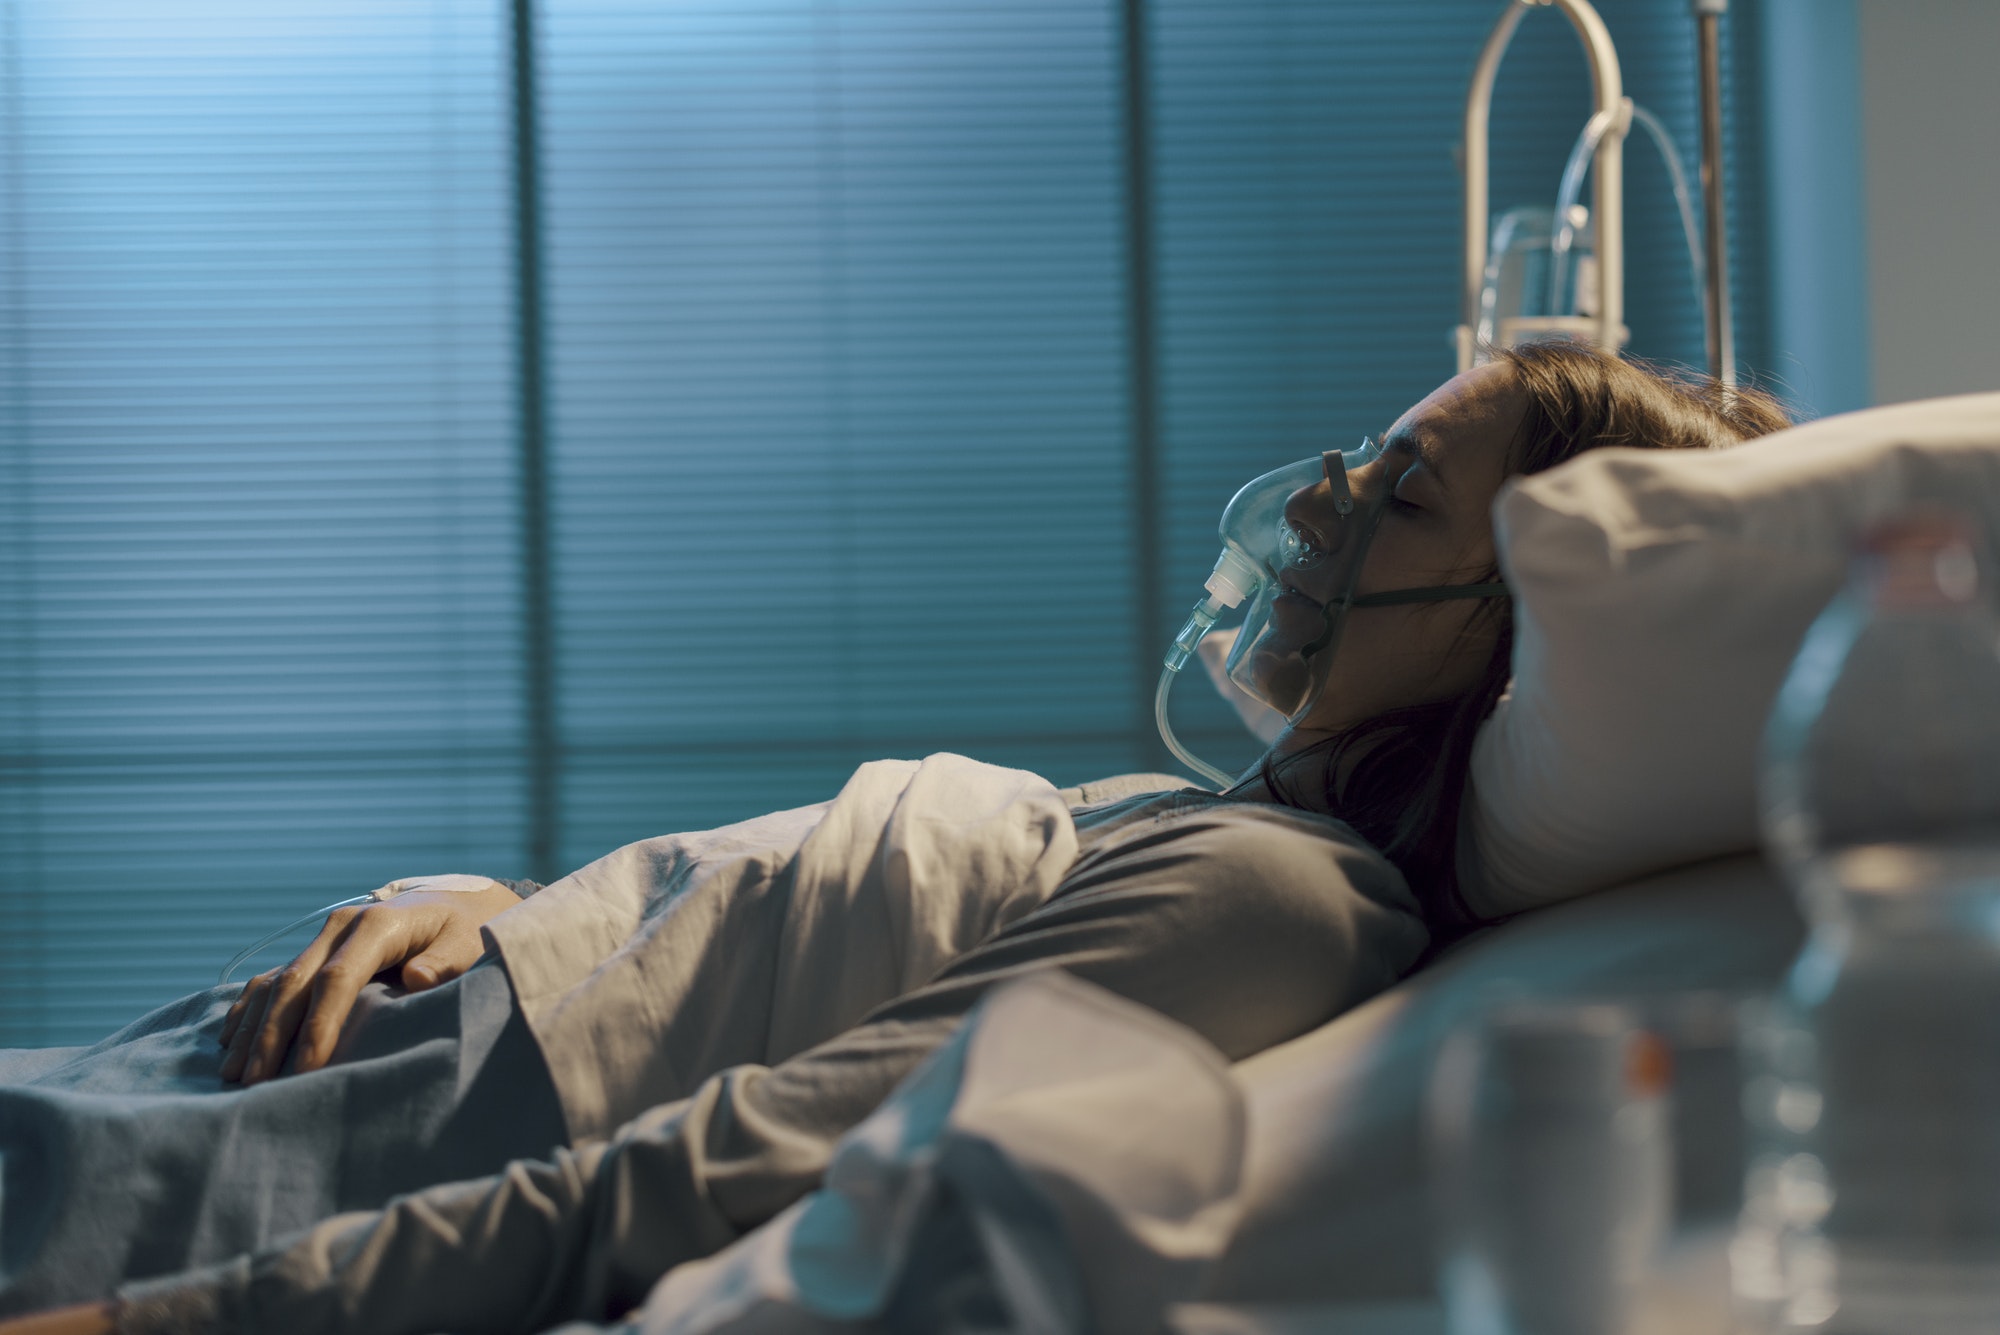 Woman with oxygen mask lying in a hospital bed